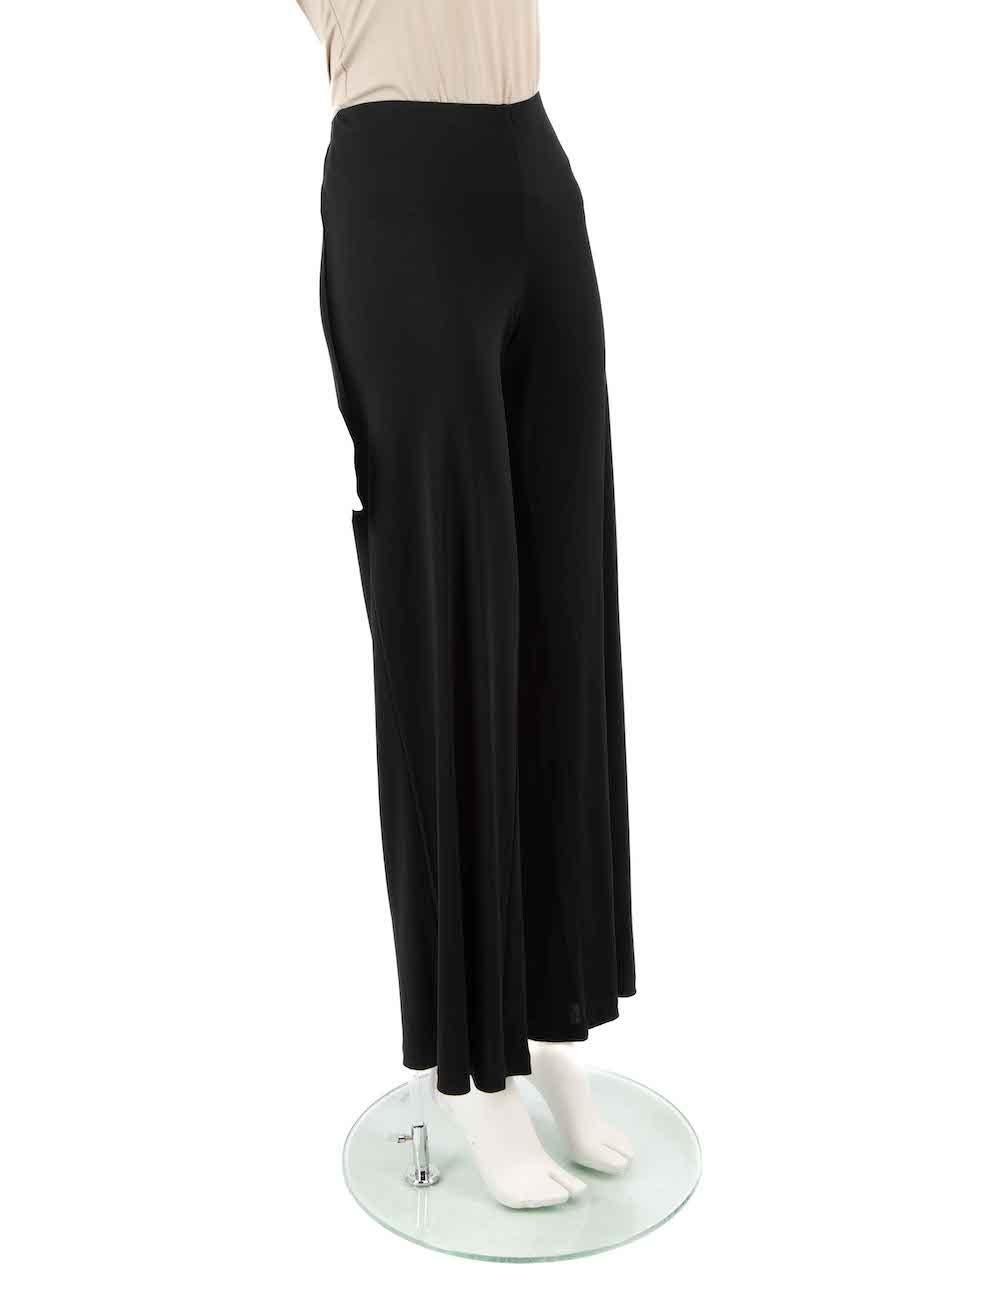 CONDITION is Very good. Hardly any visible wear to trousers is evident on this used La Perla designer resale item.
 
 
 
 Details
 
 
 Black
 
 Synthetic
 
 Trousers
 
 Wide leg
 
 Elasticated waistband
 
 
 
 
 
 Made in Italy
 
 
 
 Composition
 
